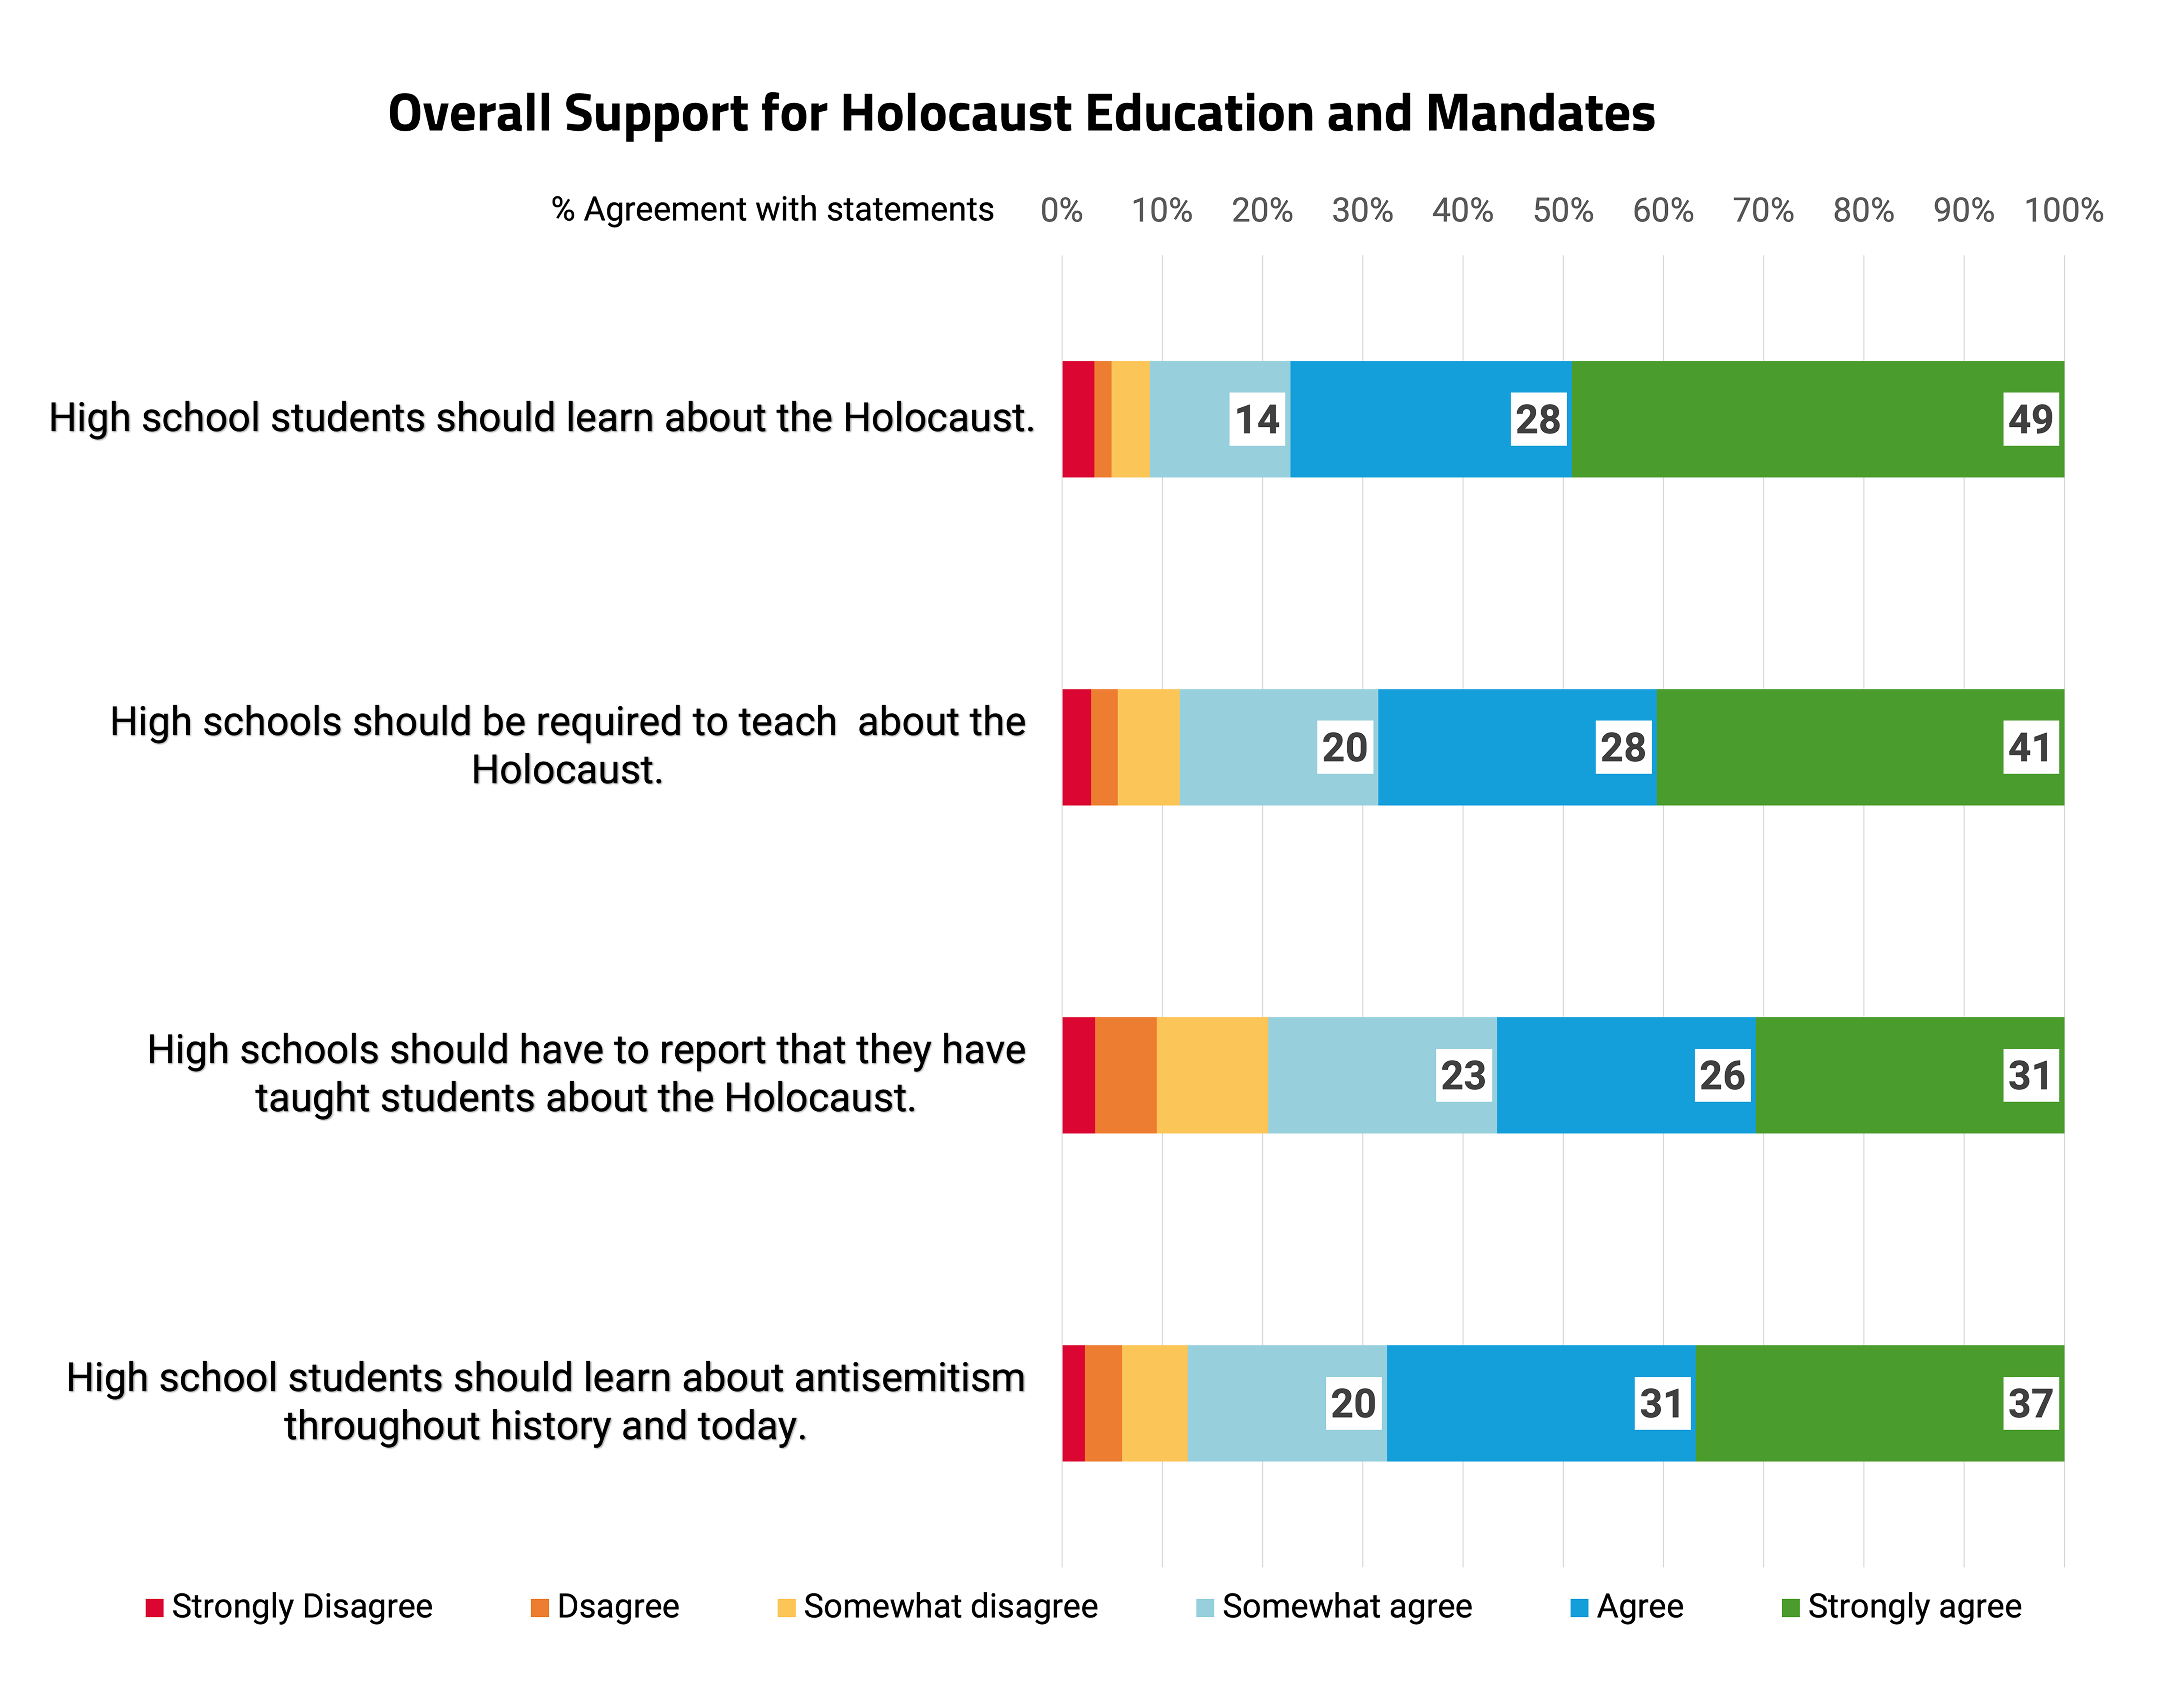 Overall Support for Holocaust Education and Mandates chart